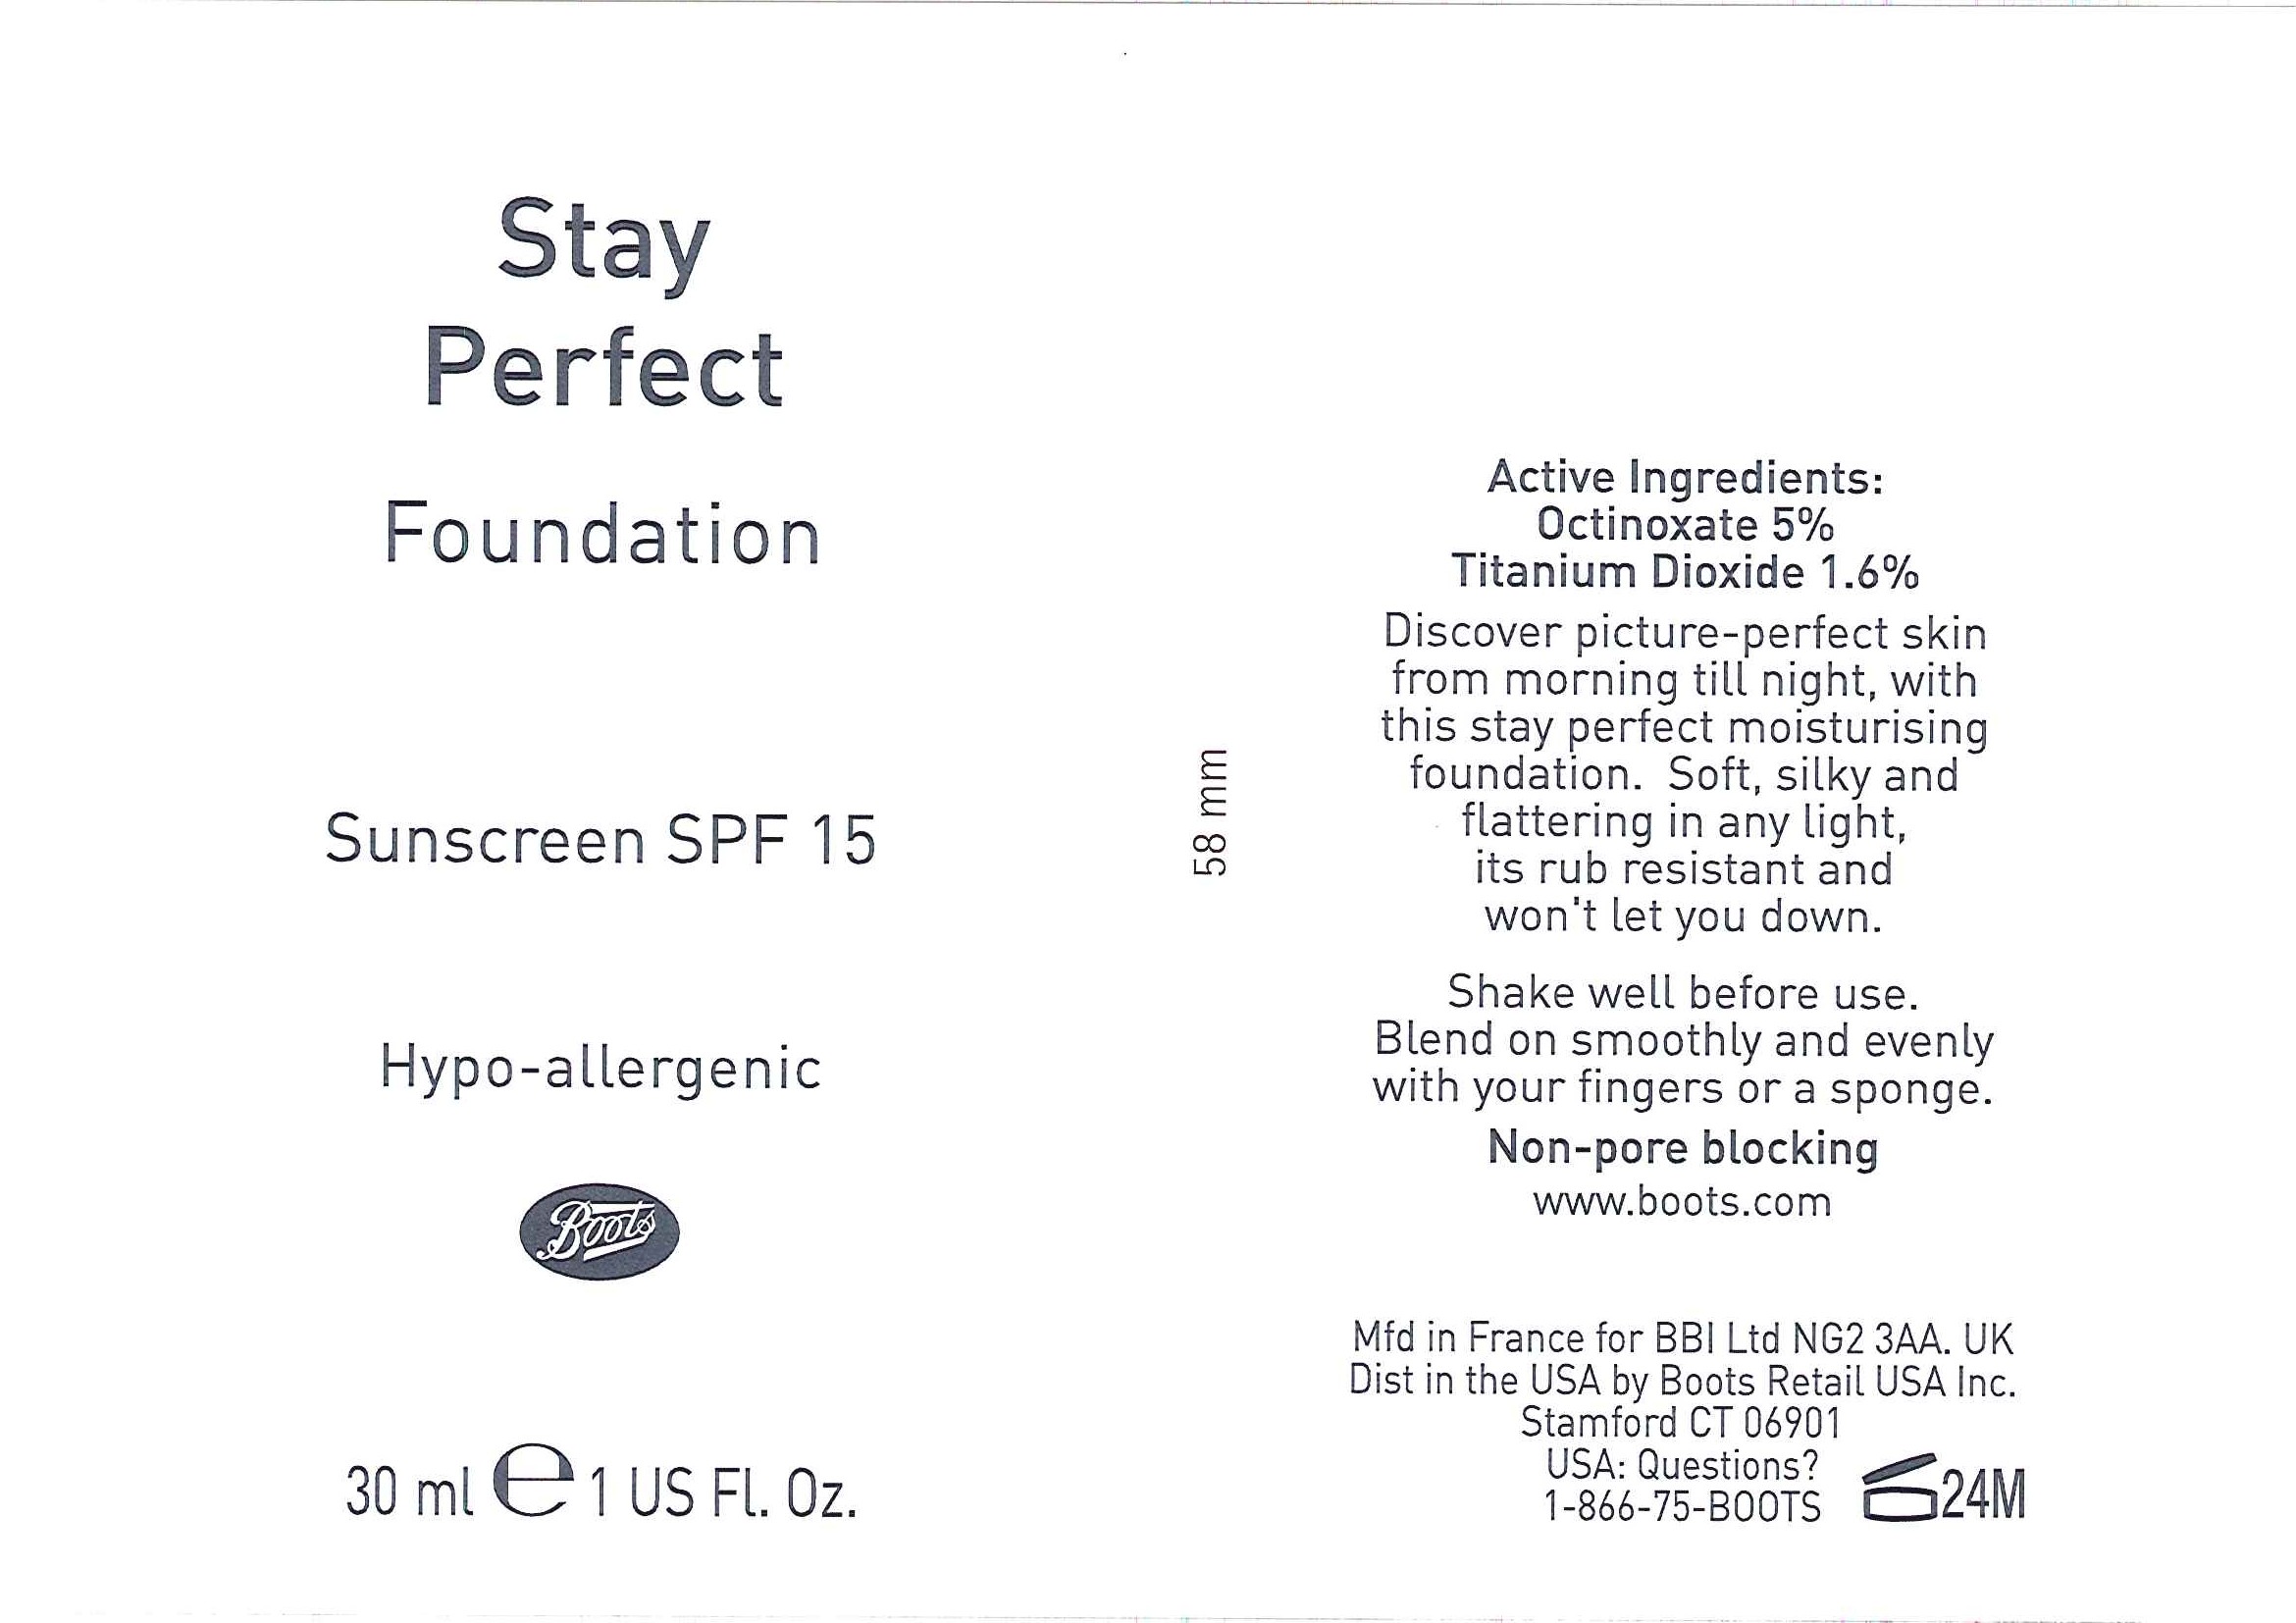 Stay Perfect Fdn bottle labels